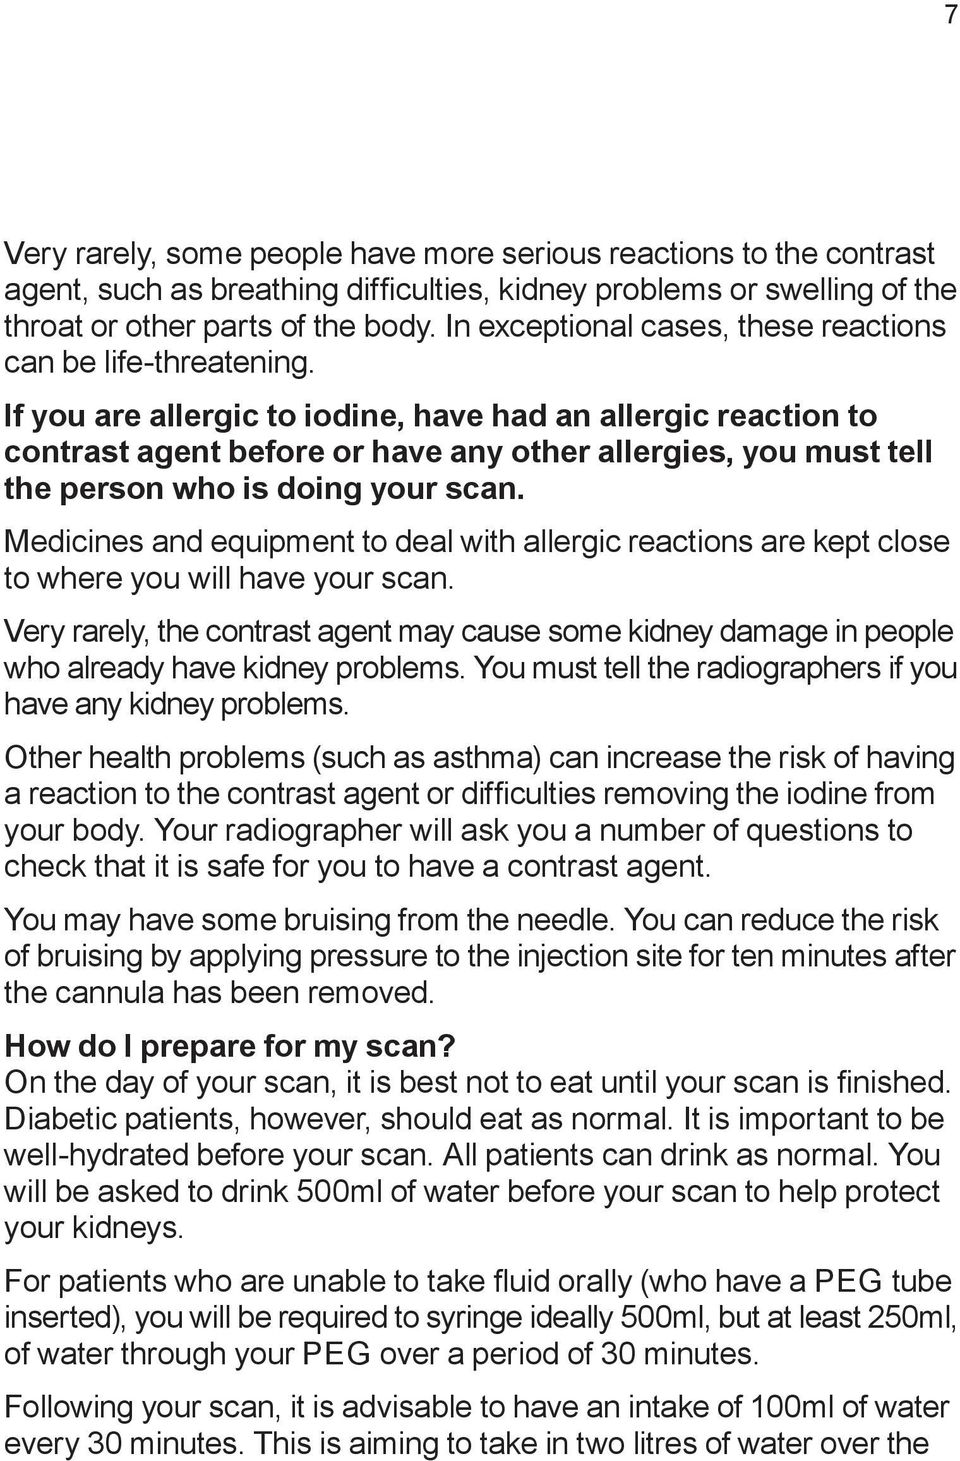 If you are allergic to iodine, have had an allergic reaction to contrast agent before or have any other allergies, you must tell the person who is doing your scan.